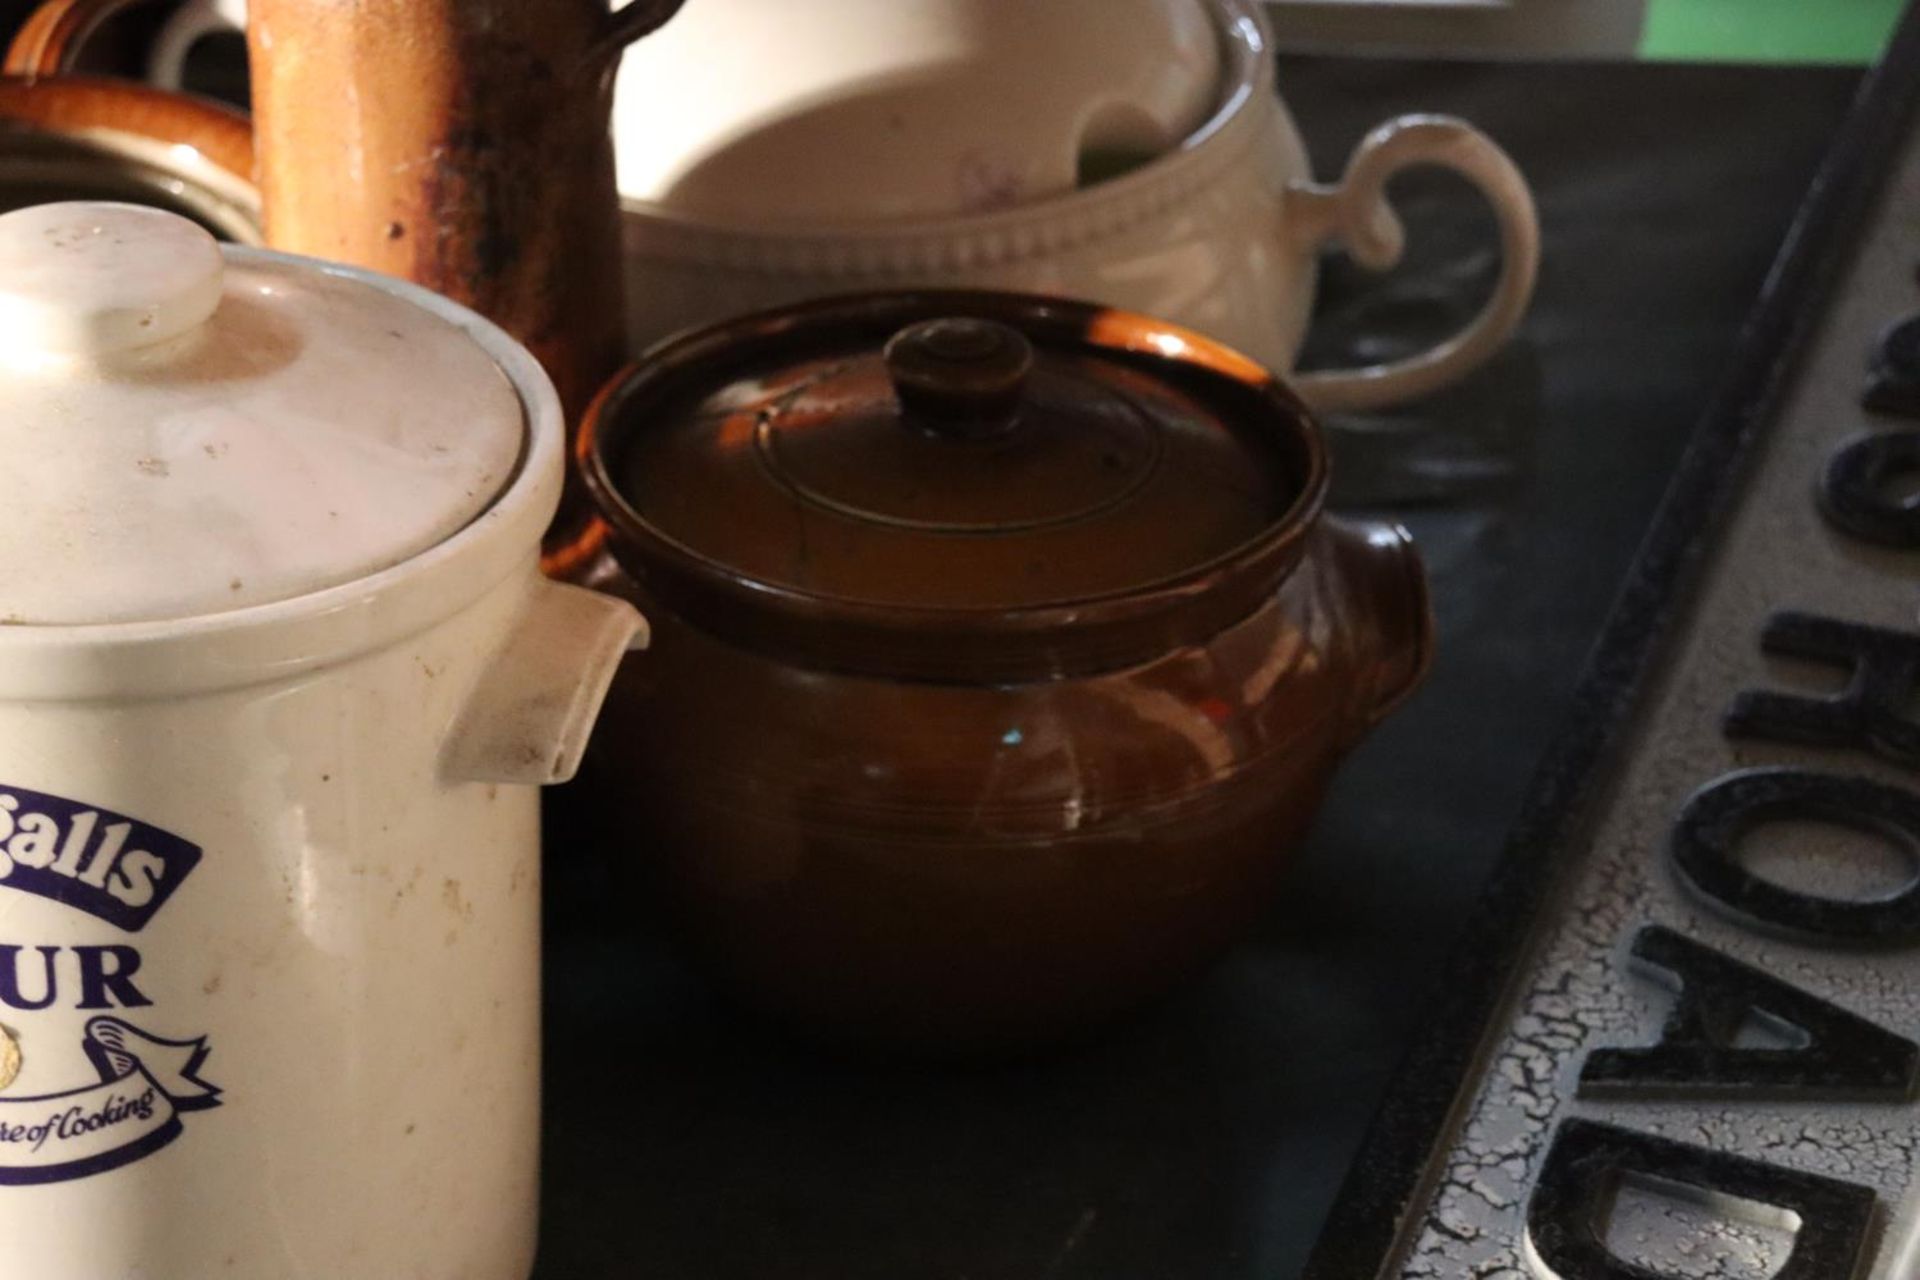 A QUANTITY OF CERAMIC ITEMS TO INCLUDE A McDOUGALLS FLOUR CONTAINER, A LARGE LIDDED SERVING - Image 2 of 6